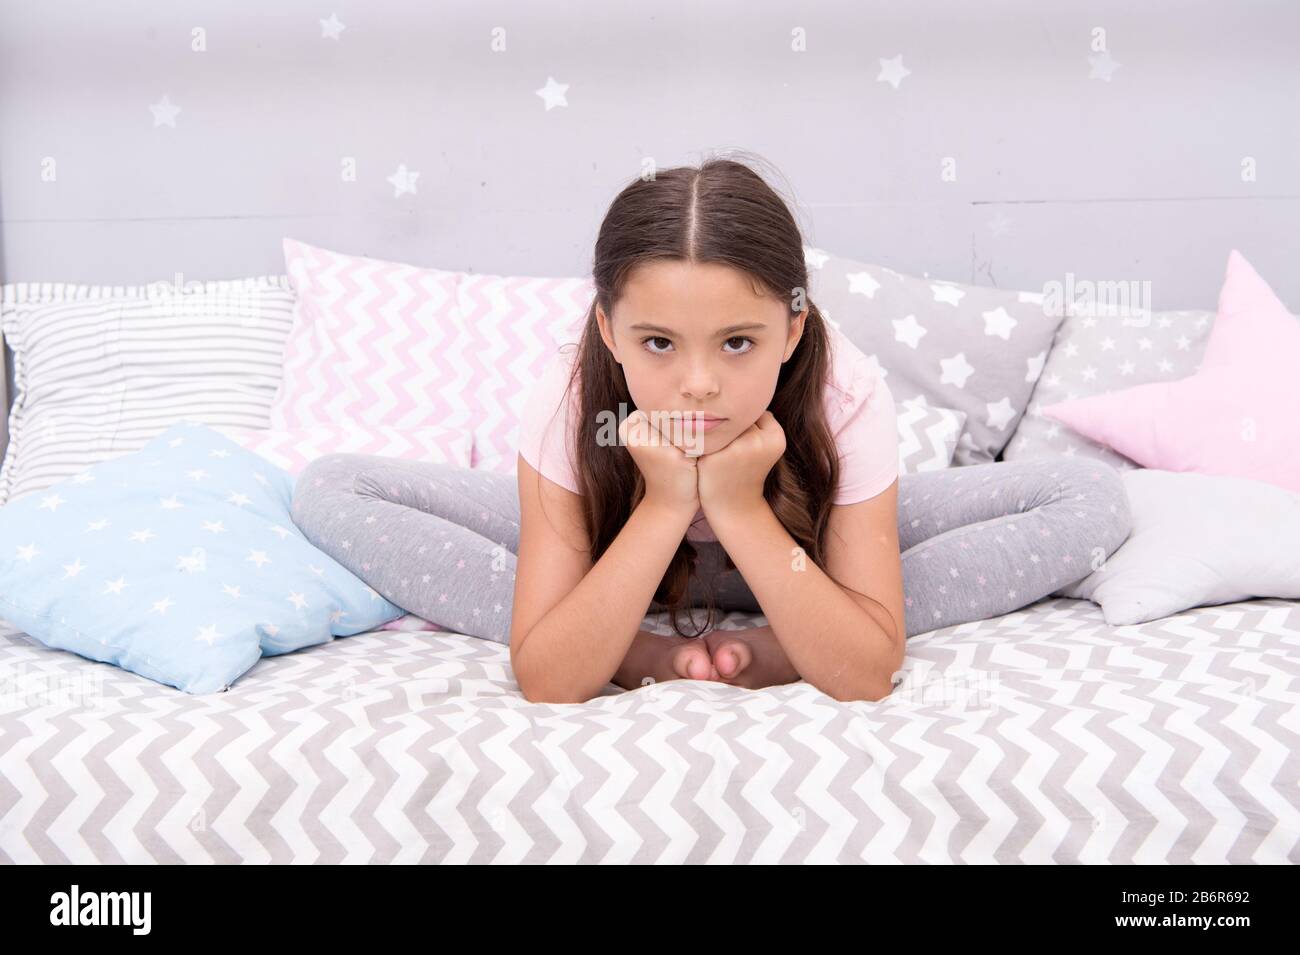 Why so sad. Sad girl sit in bed. Little child with sad look. Bedtime routine. Daytime nap. Kids health. Childcare. Early morning hour. Good night. Unhappy and sad. Stock Photo